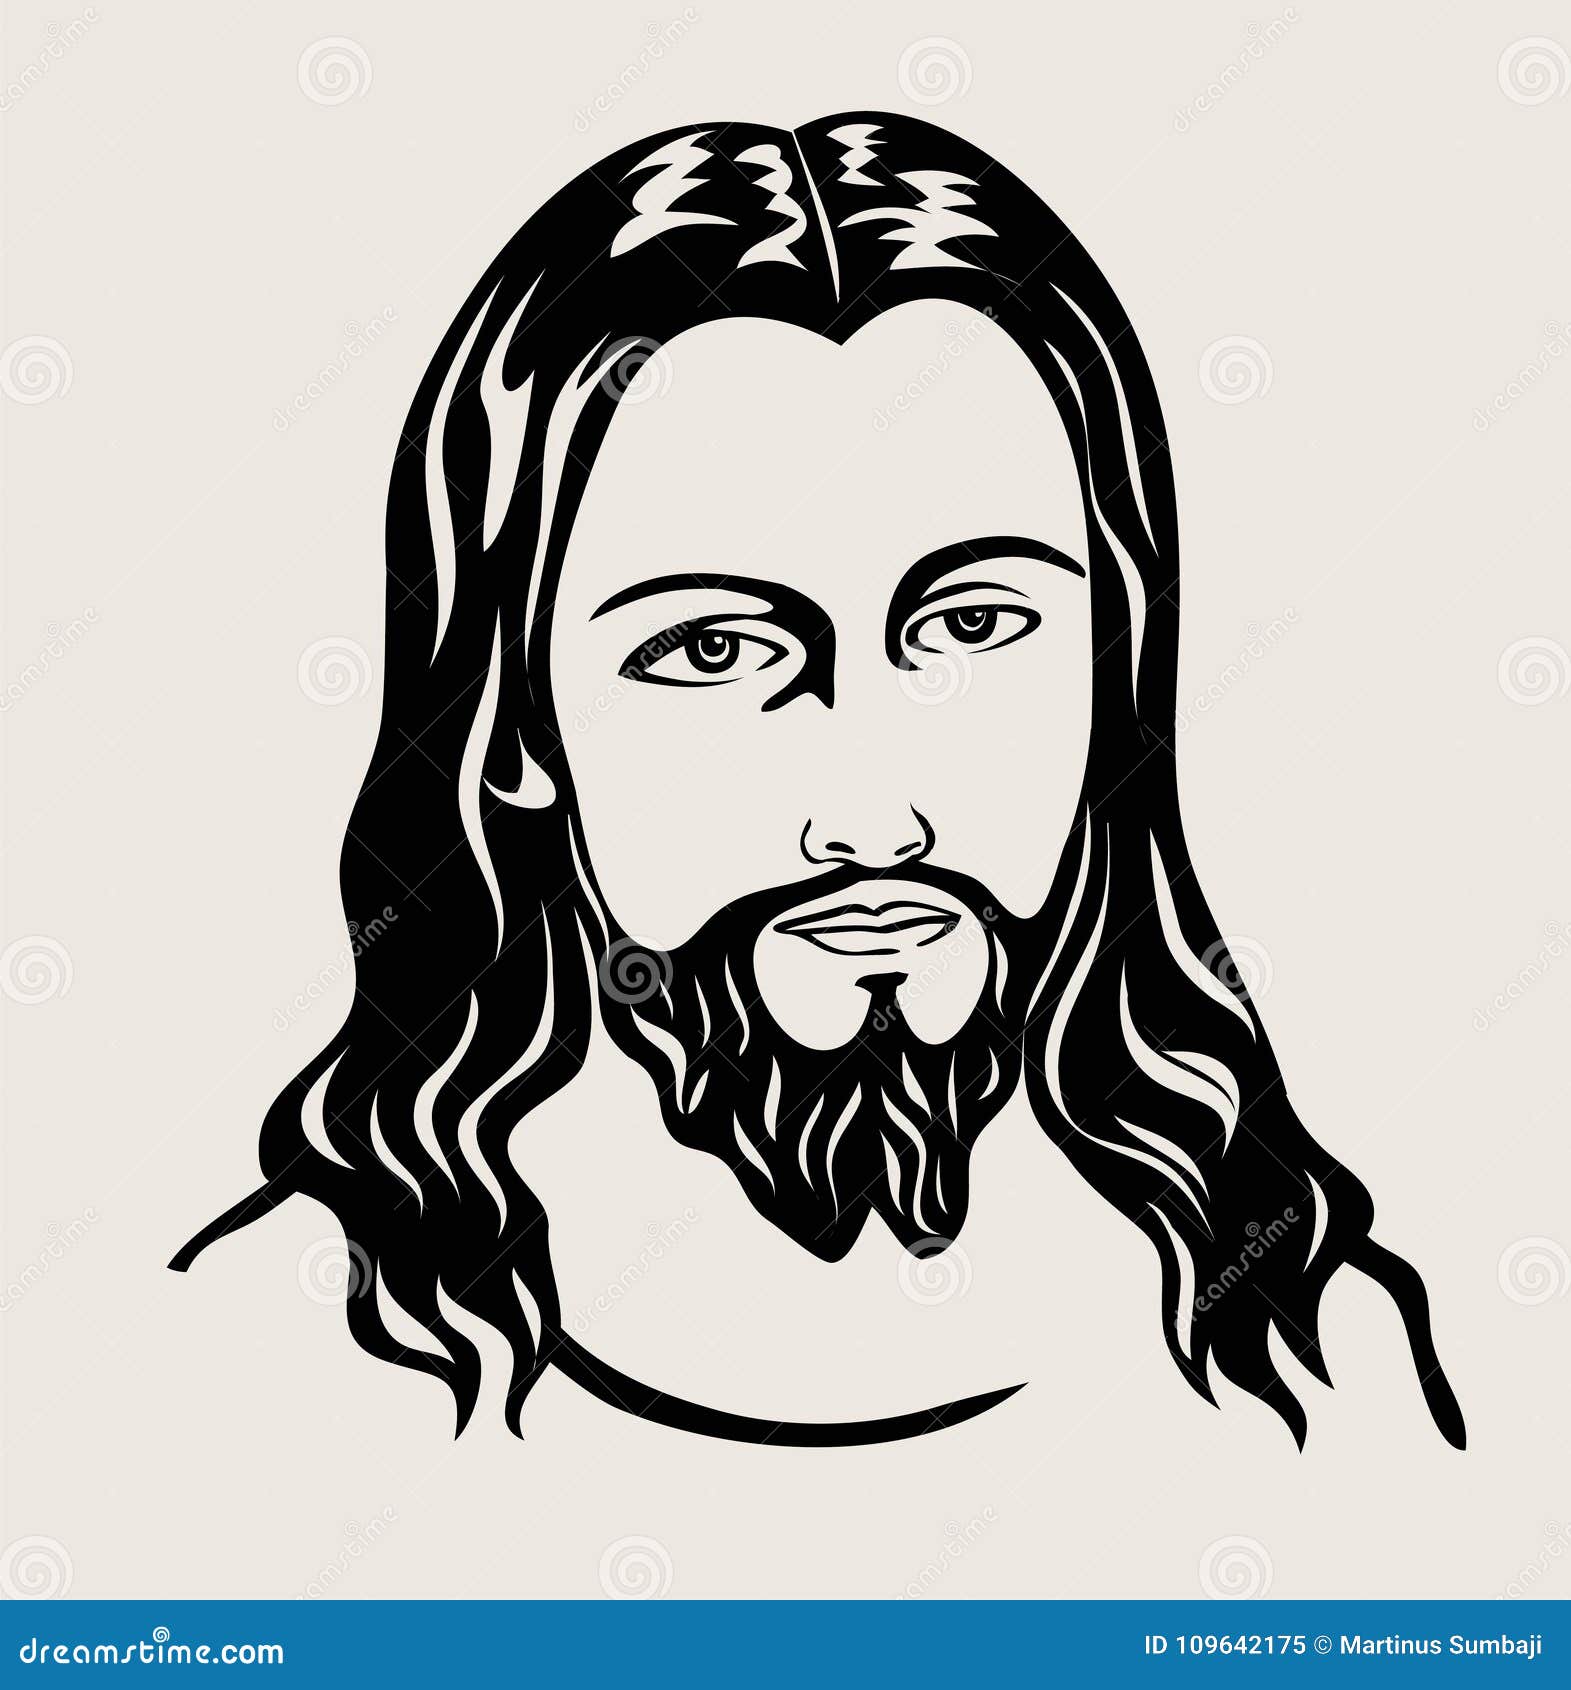 How to Draw Jesus - Really Easy Drawing Tutorial